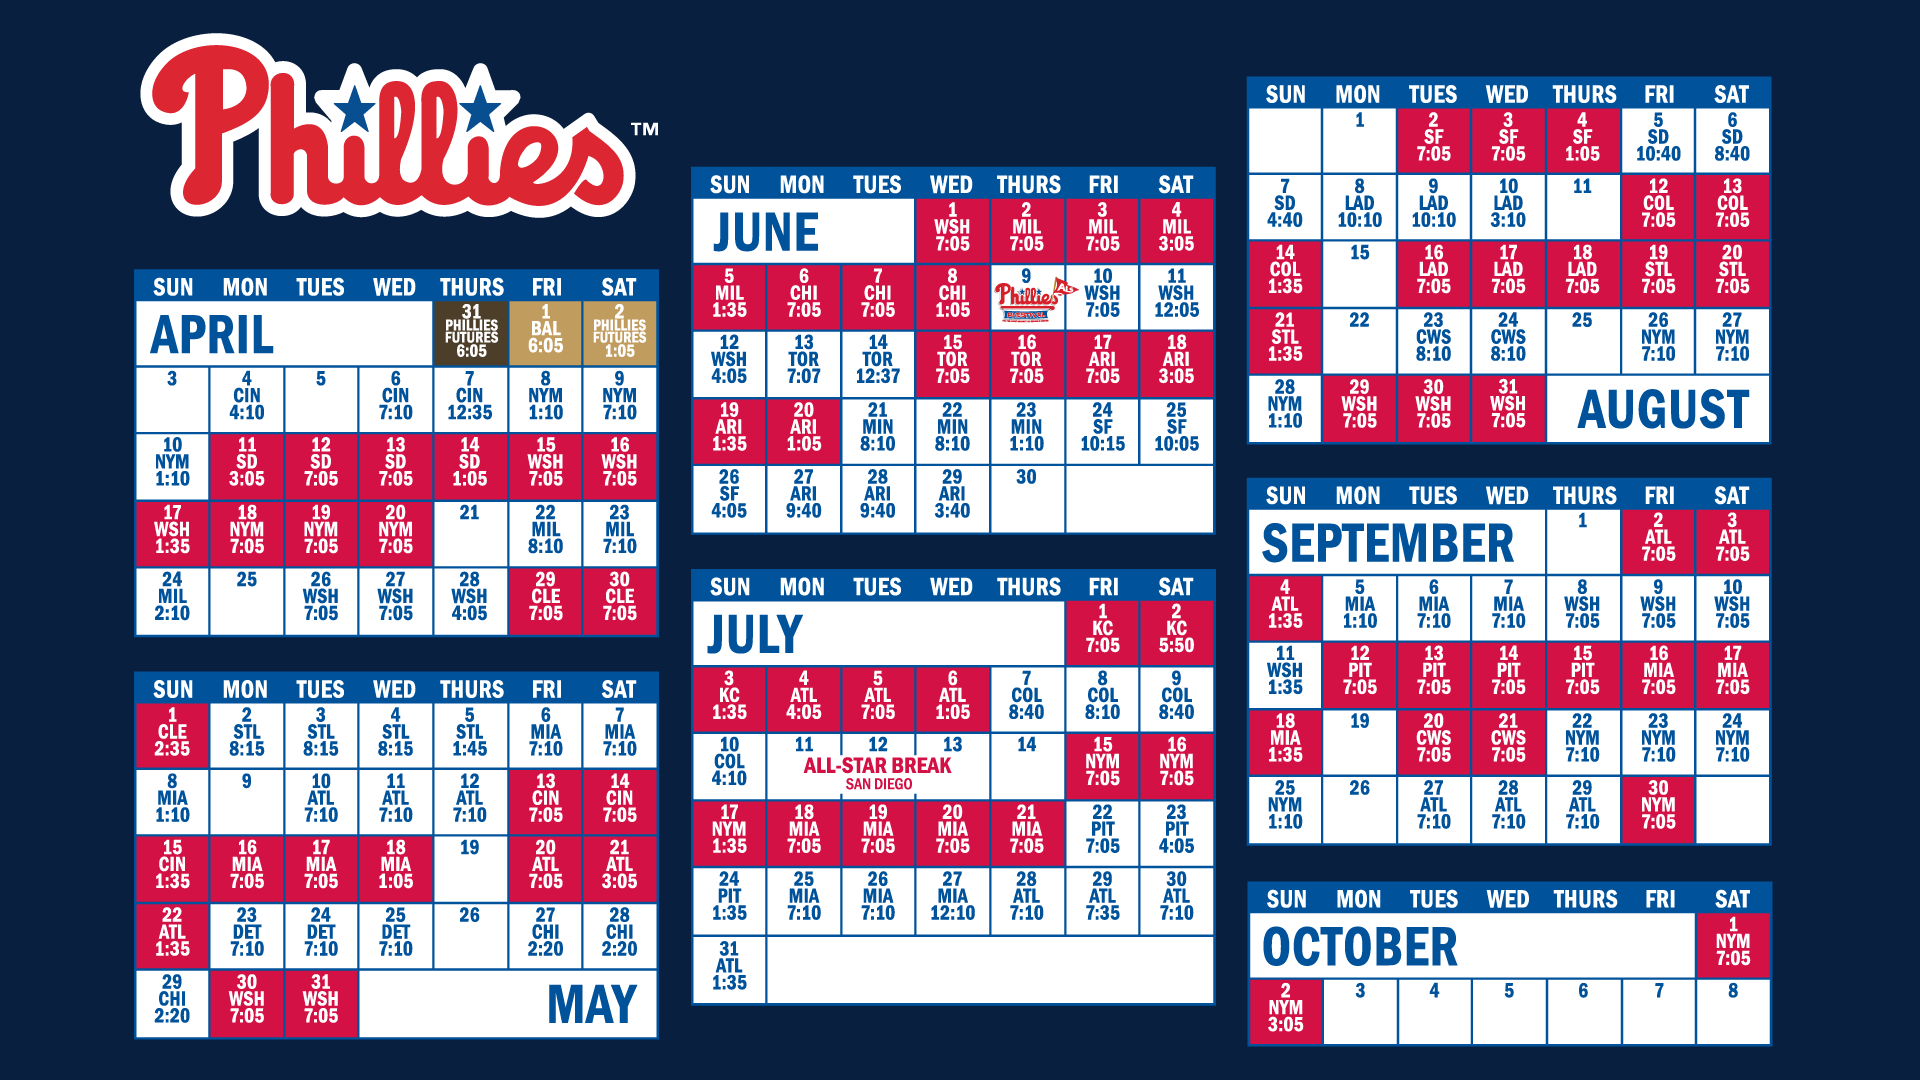 My husband requested a simple Phillies Schedule desktop wallpaper